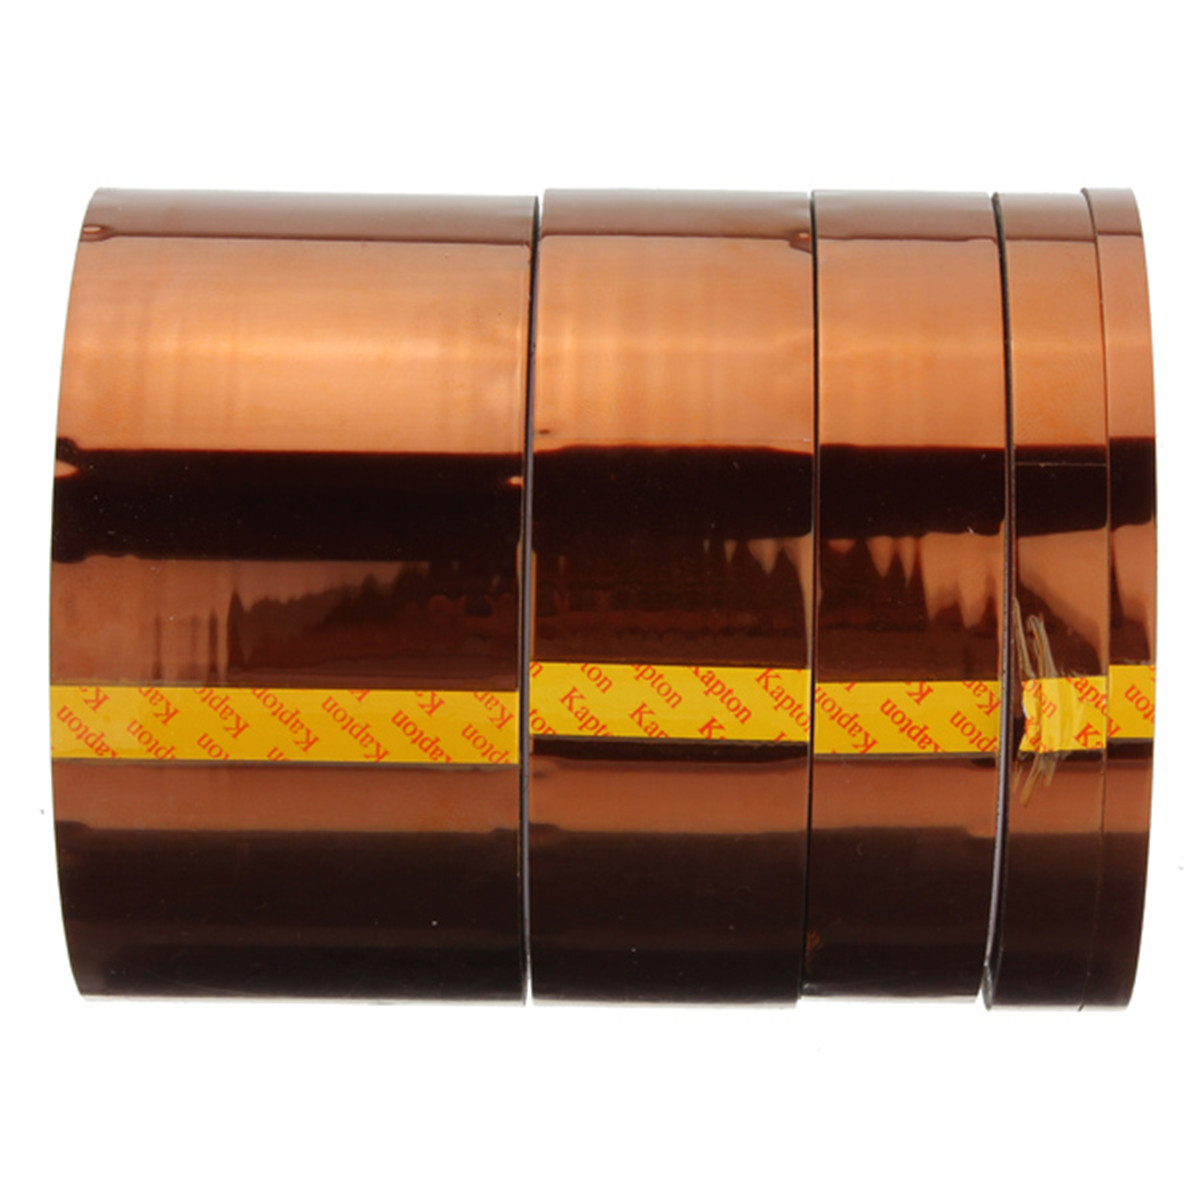 Excellway-High-Temperature-Heat-Resistant-Tape-Polyimide-50MM-x-30M-49152-7